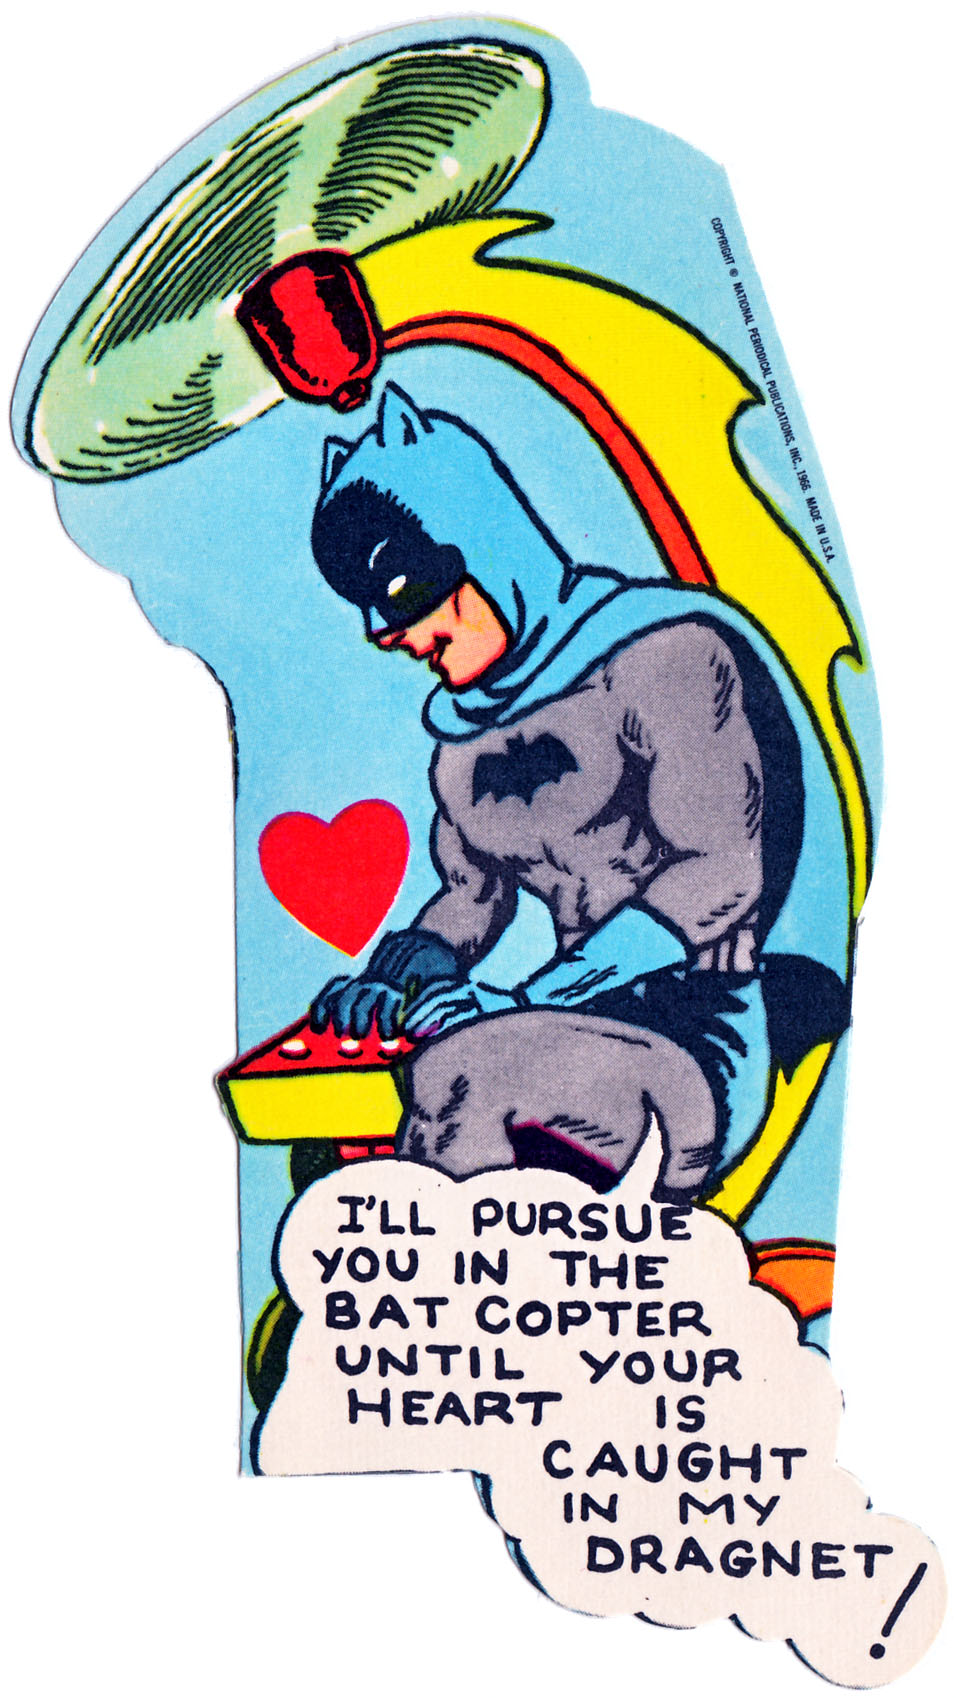 1960s Batman Valentine’s Day Cards Are Weirdly Awesome